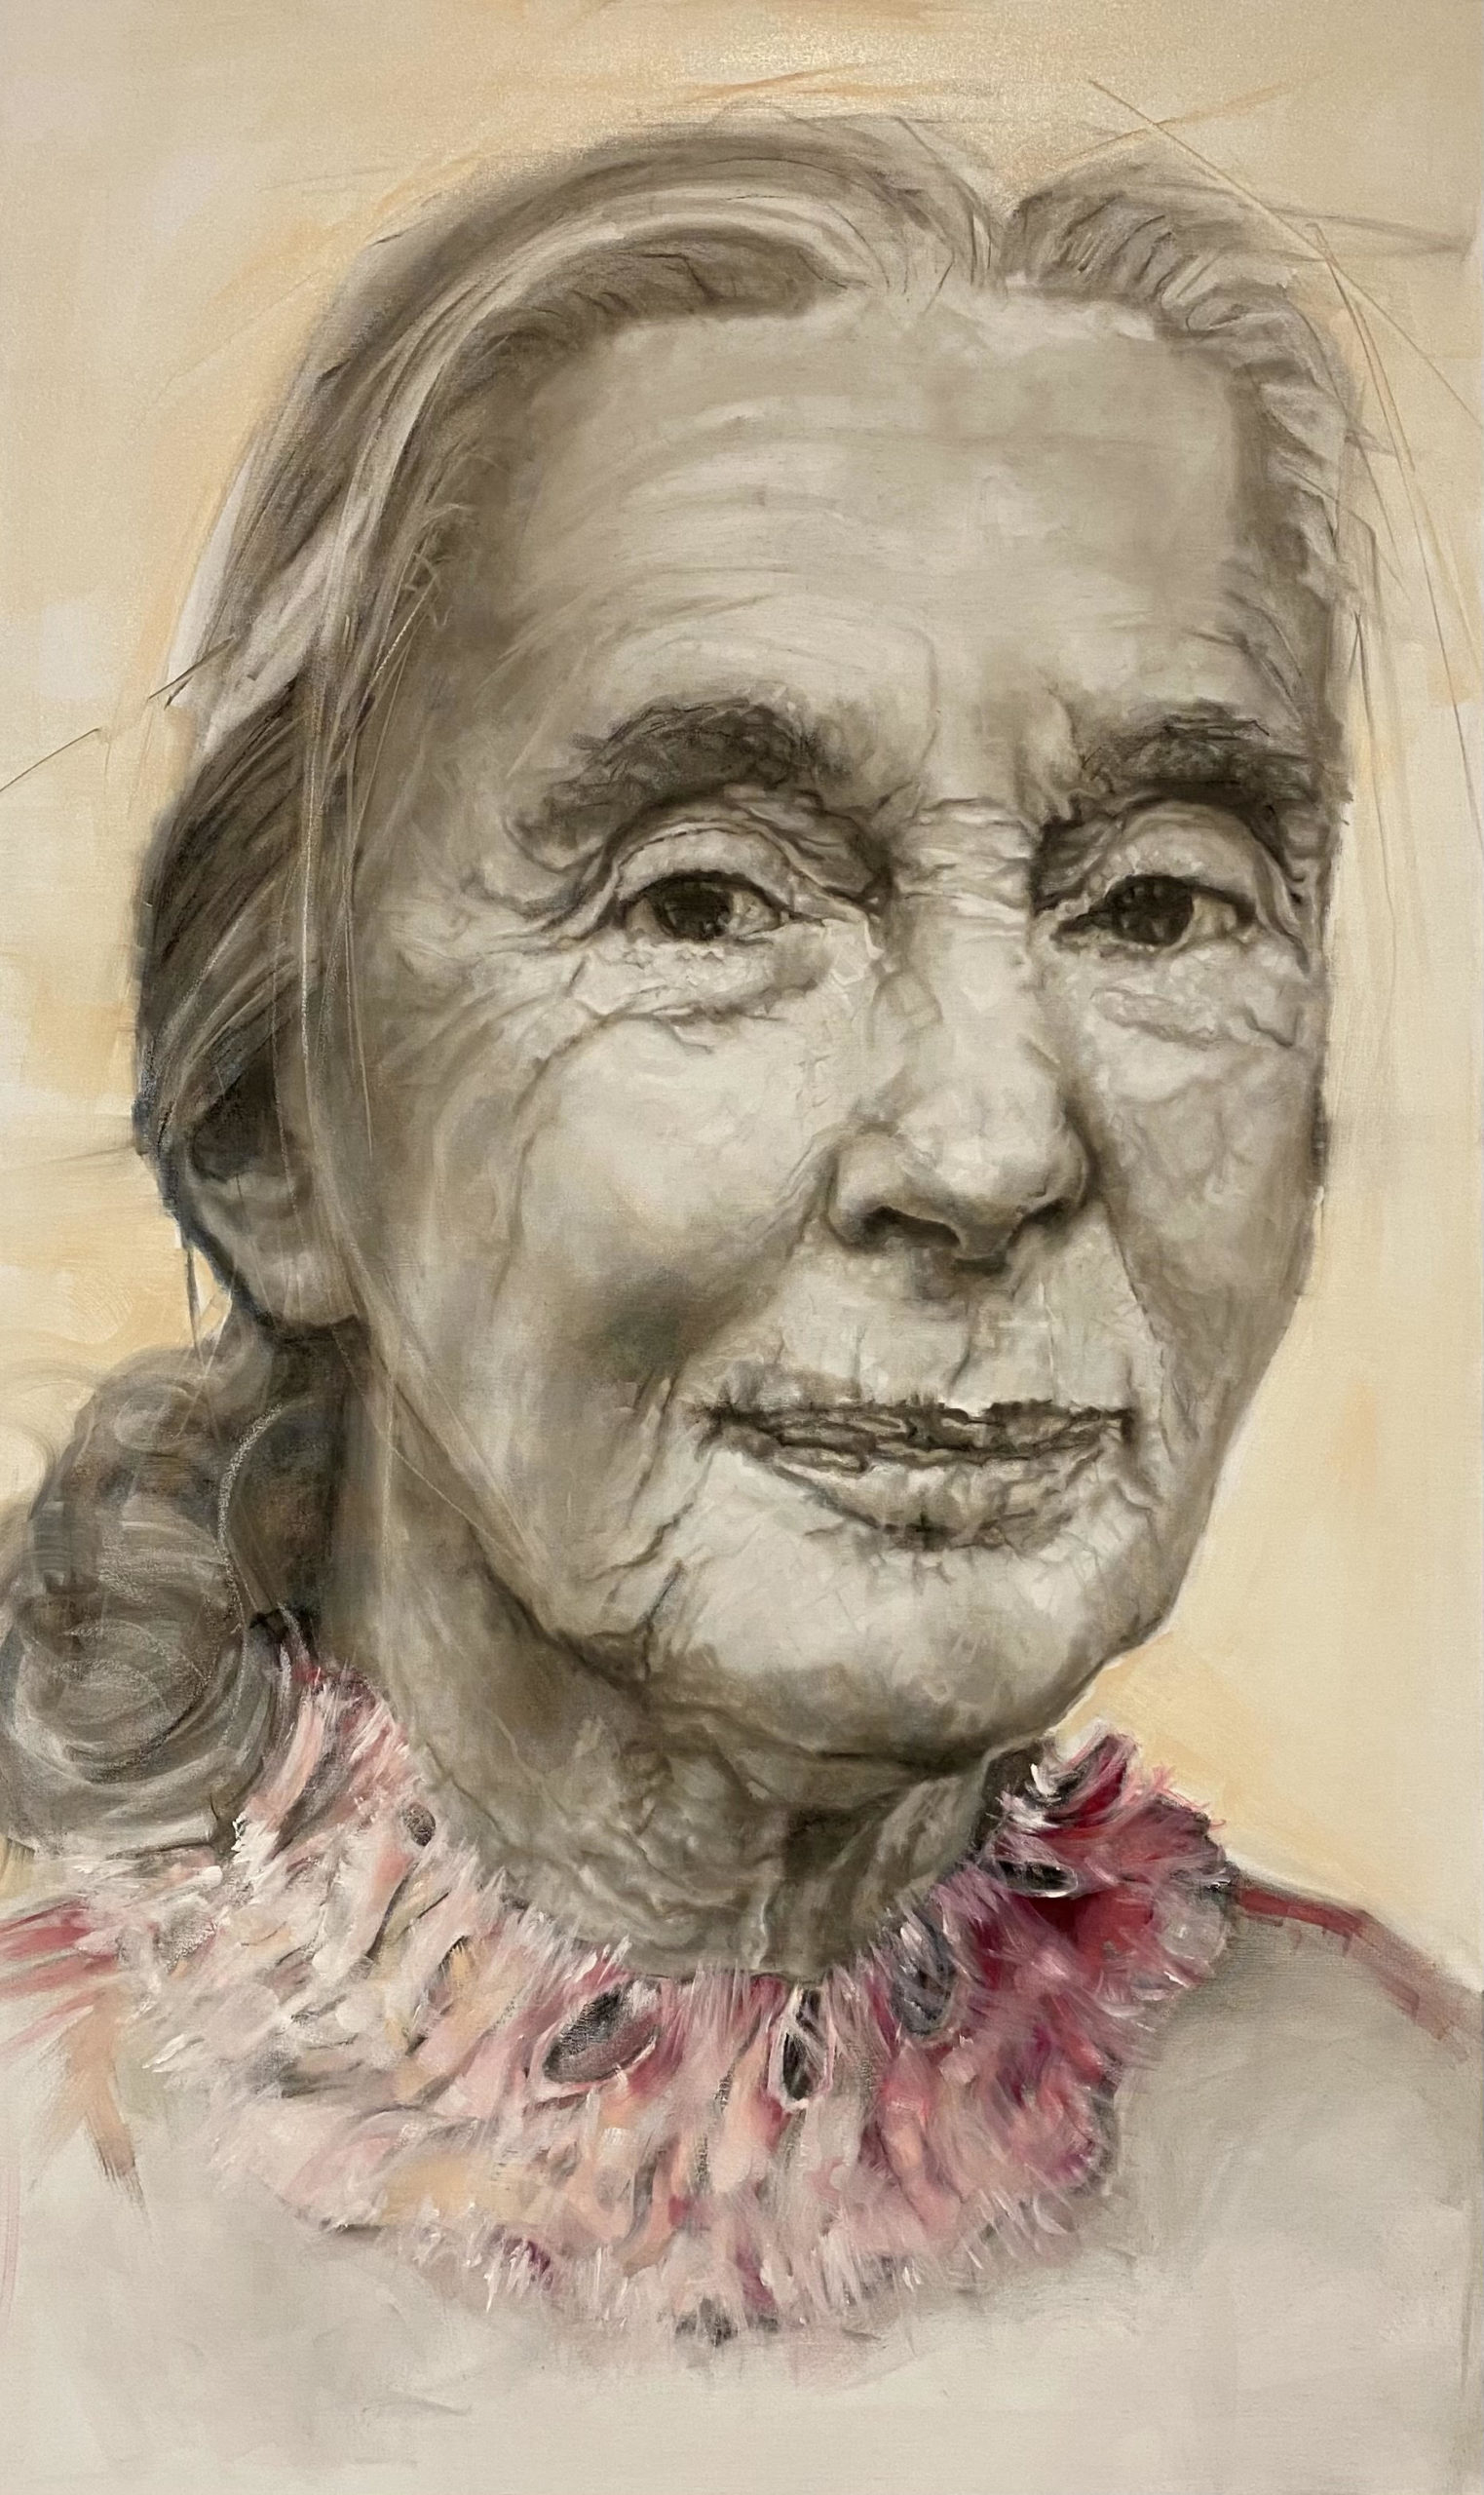 Shana Wilson, "Jane Goodall," charcoal and oil on canvas, 60 x 42 in.